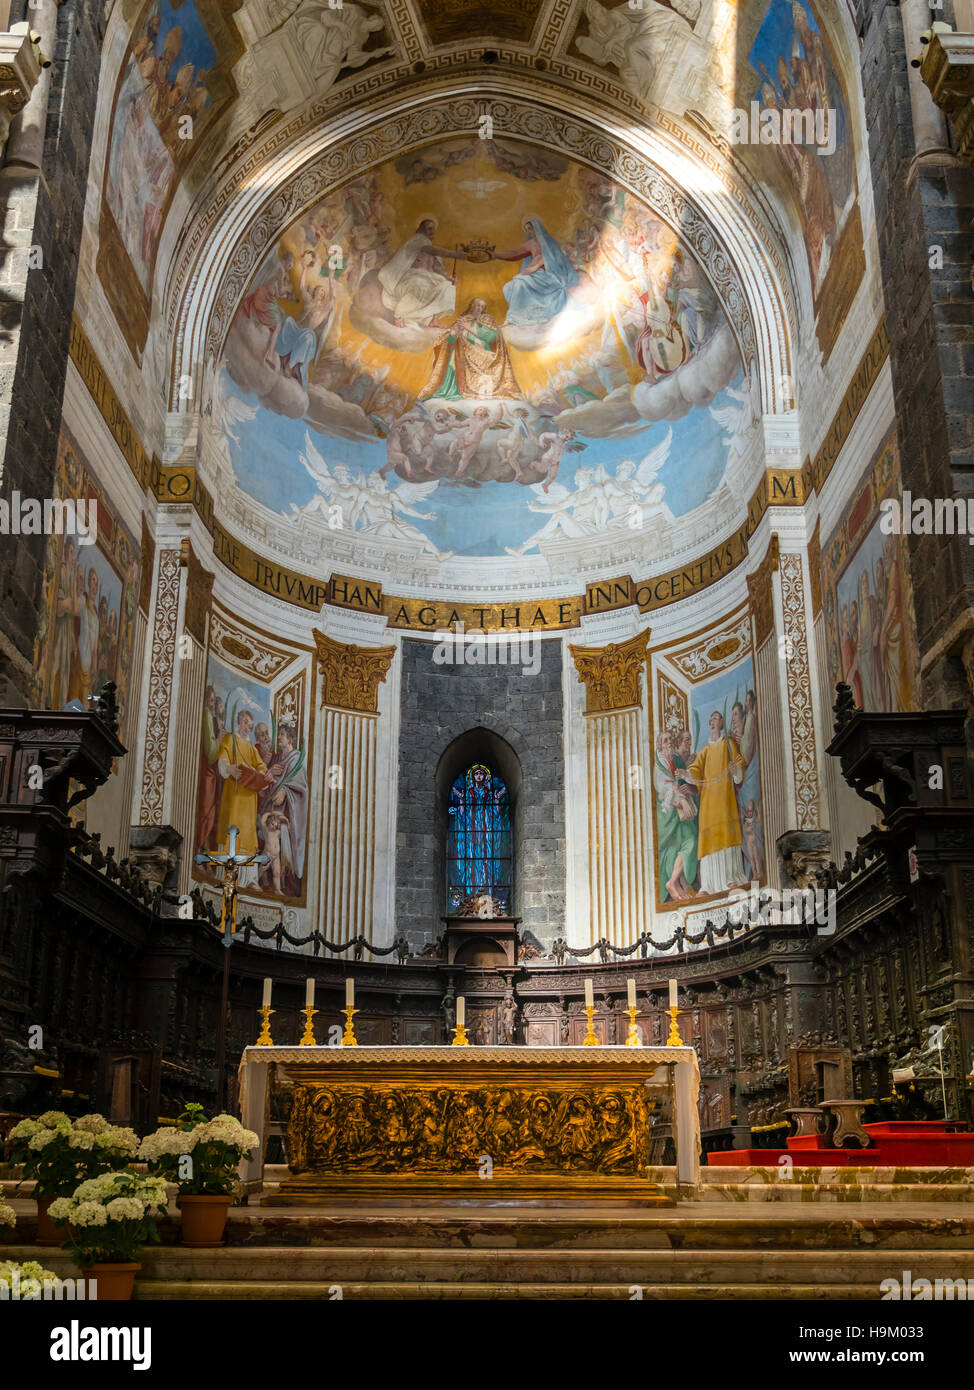 Interior of the Cathedral of St. Agata, Piazza del Doumo, Province of Catania, Province of Catania, Sicily, Italy Stock Photo